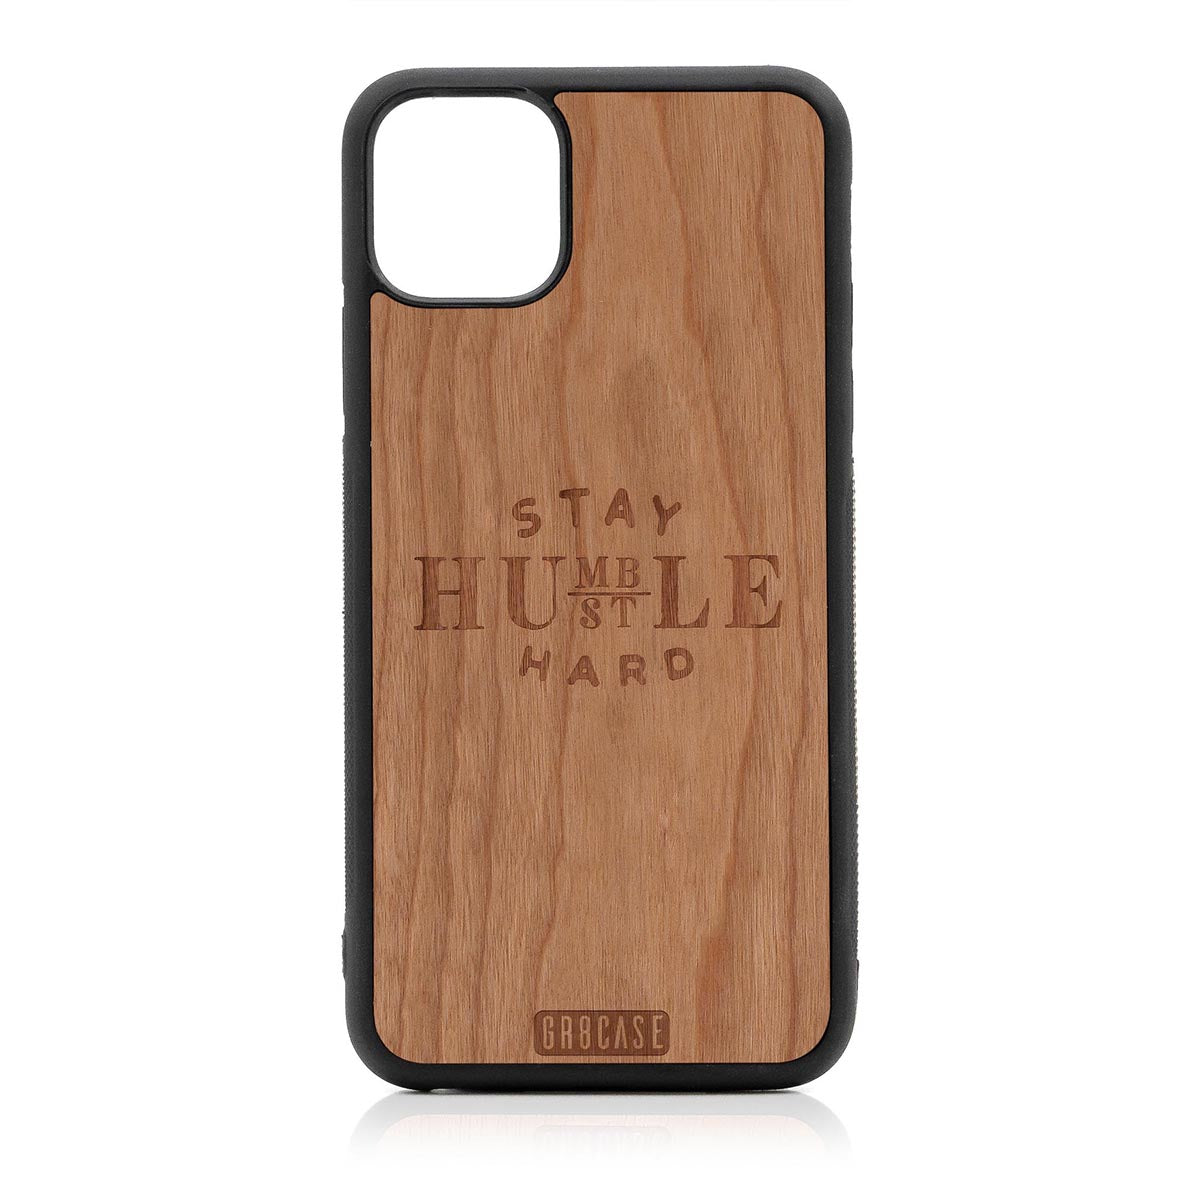 Stay Humble Hustle Hard Design Wood Case For iPhone 11 Pro Max by GR8CASE